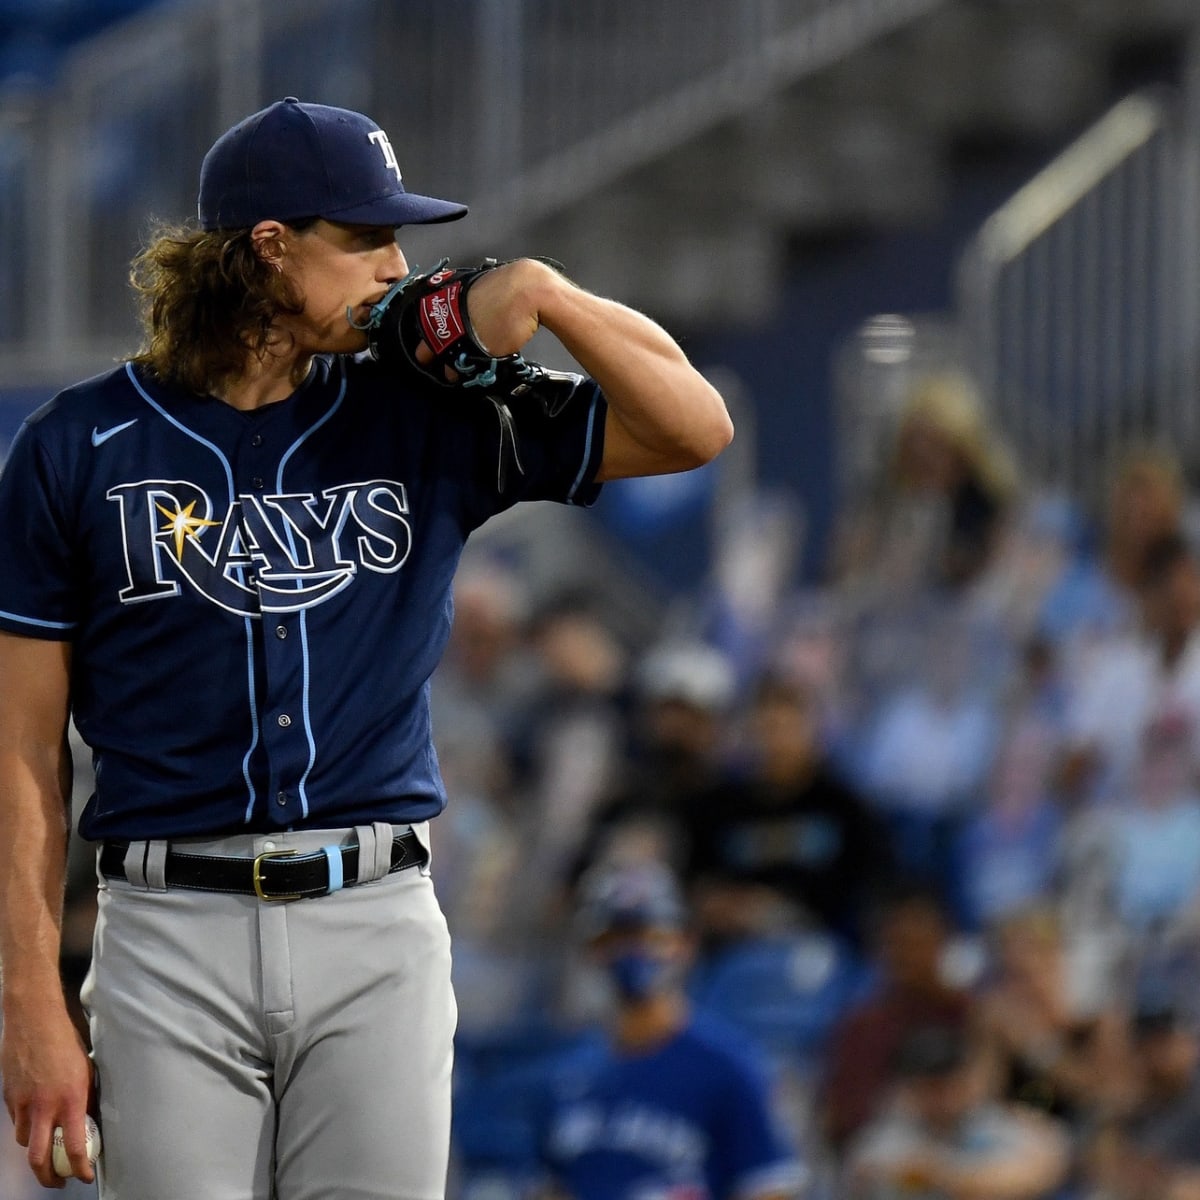 GameDay Preview: Tampa Bay Rays Pitcher Tyler Glasnow Back For